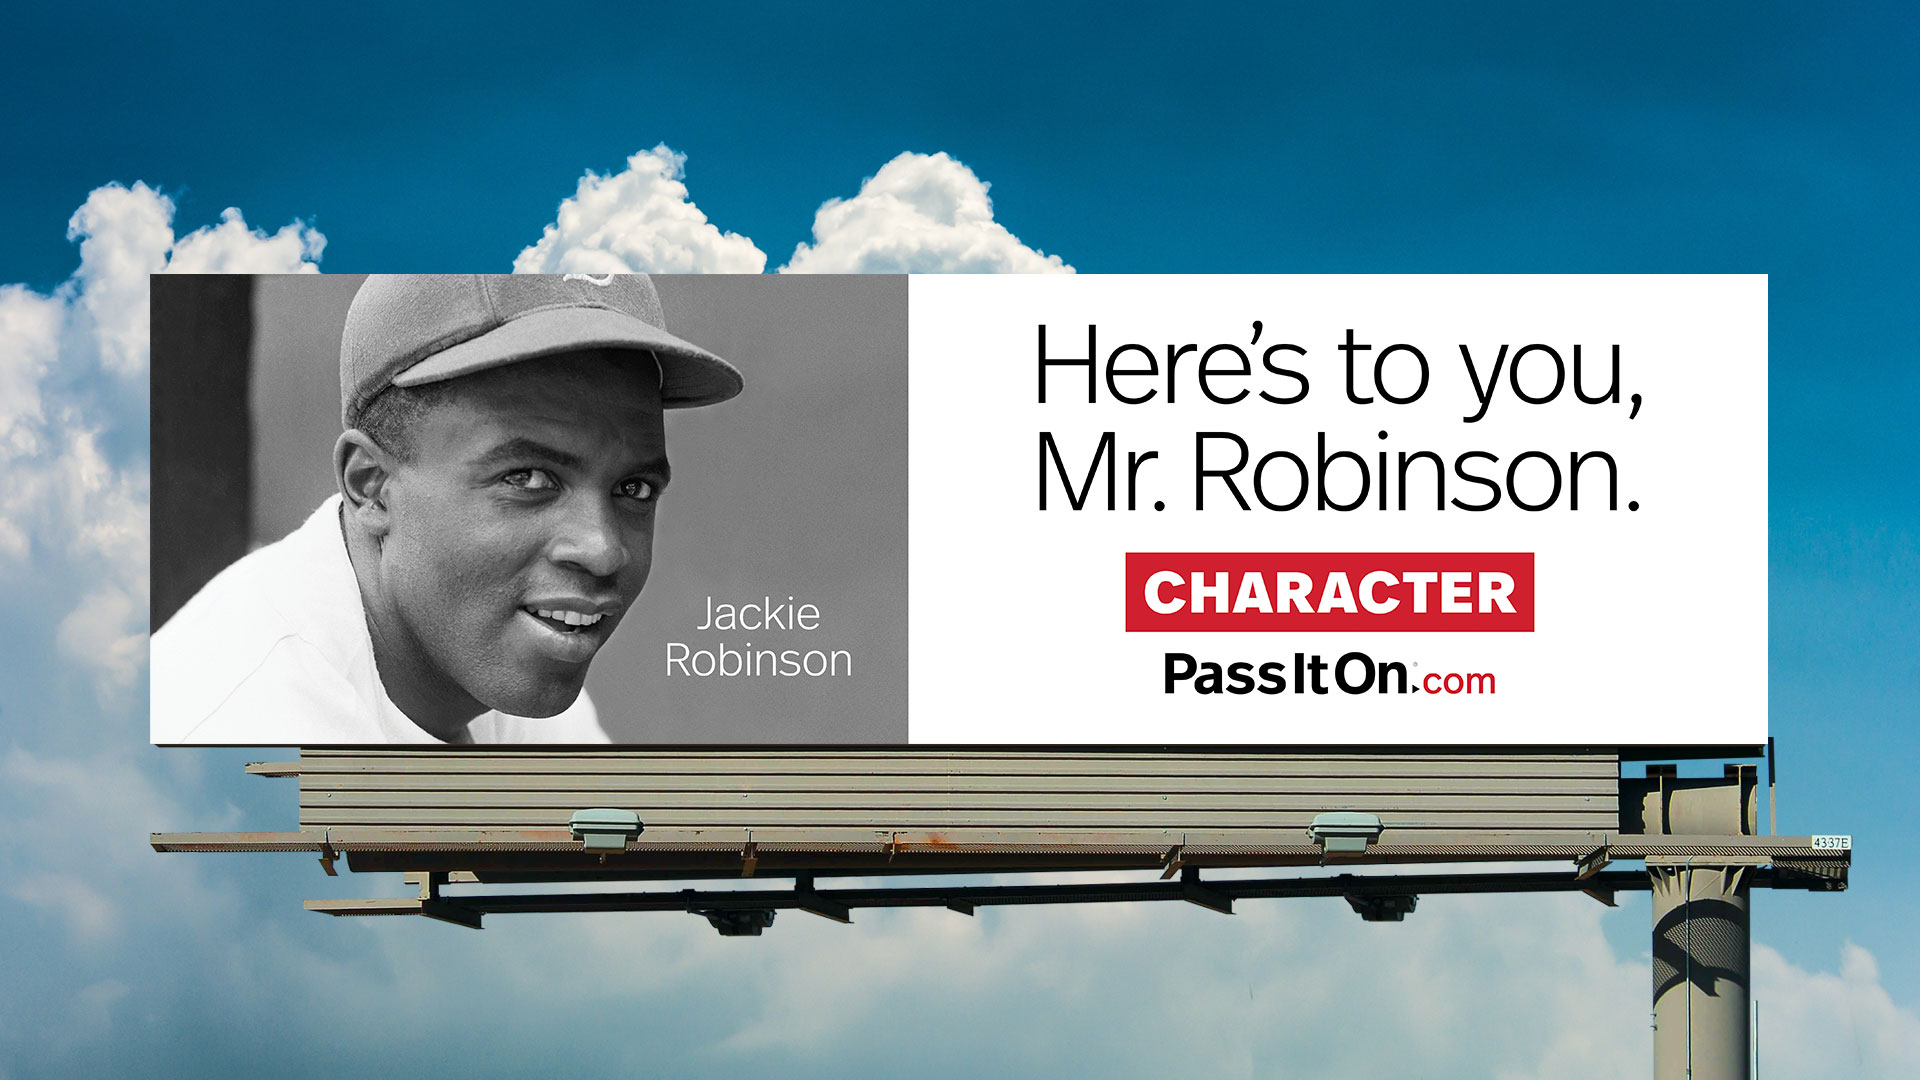 See The Jackie Robinson Billboard About Character And Pass It On